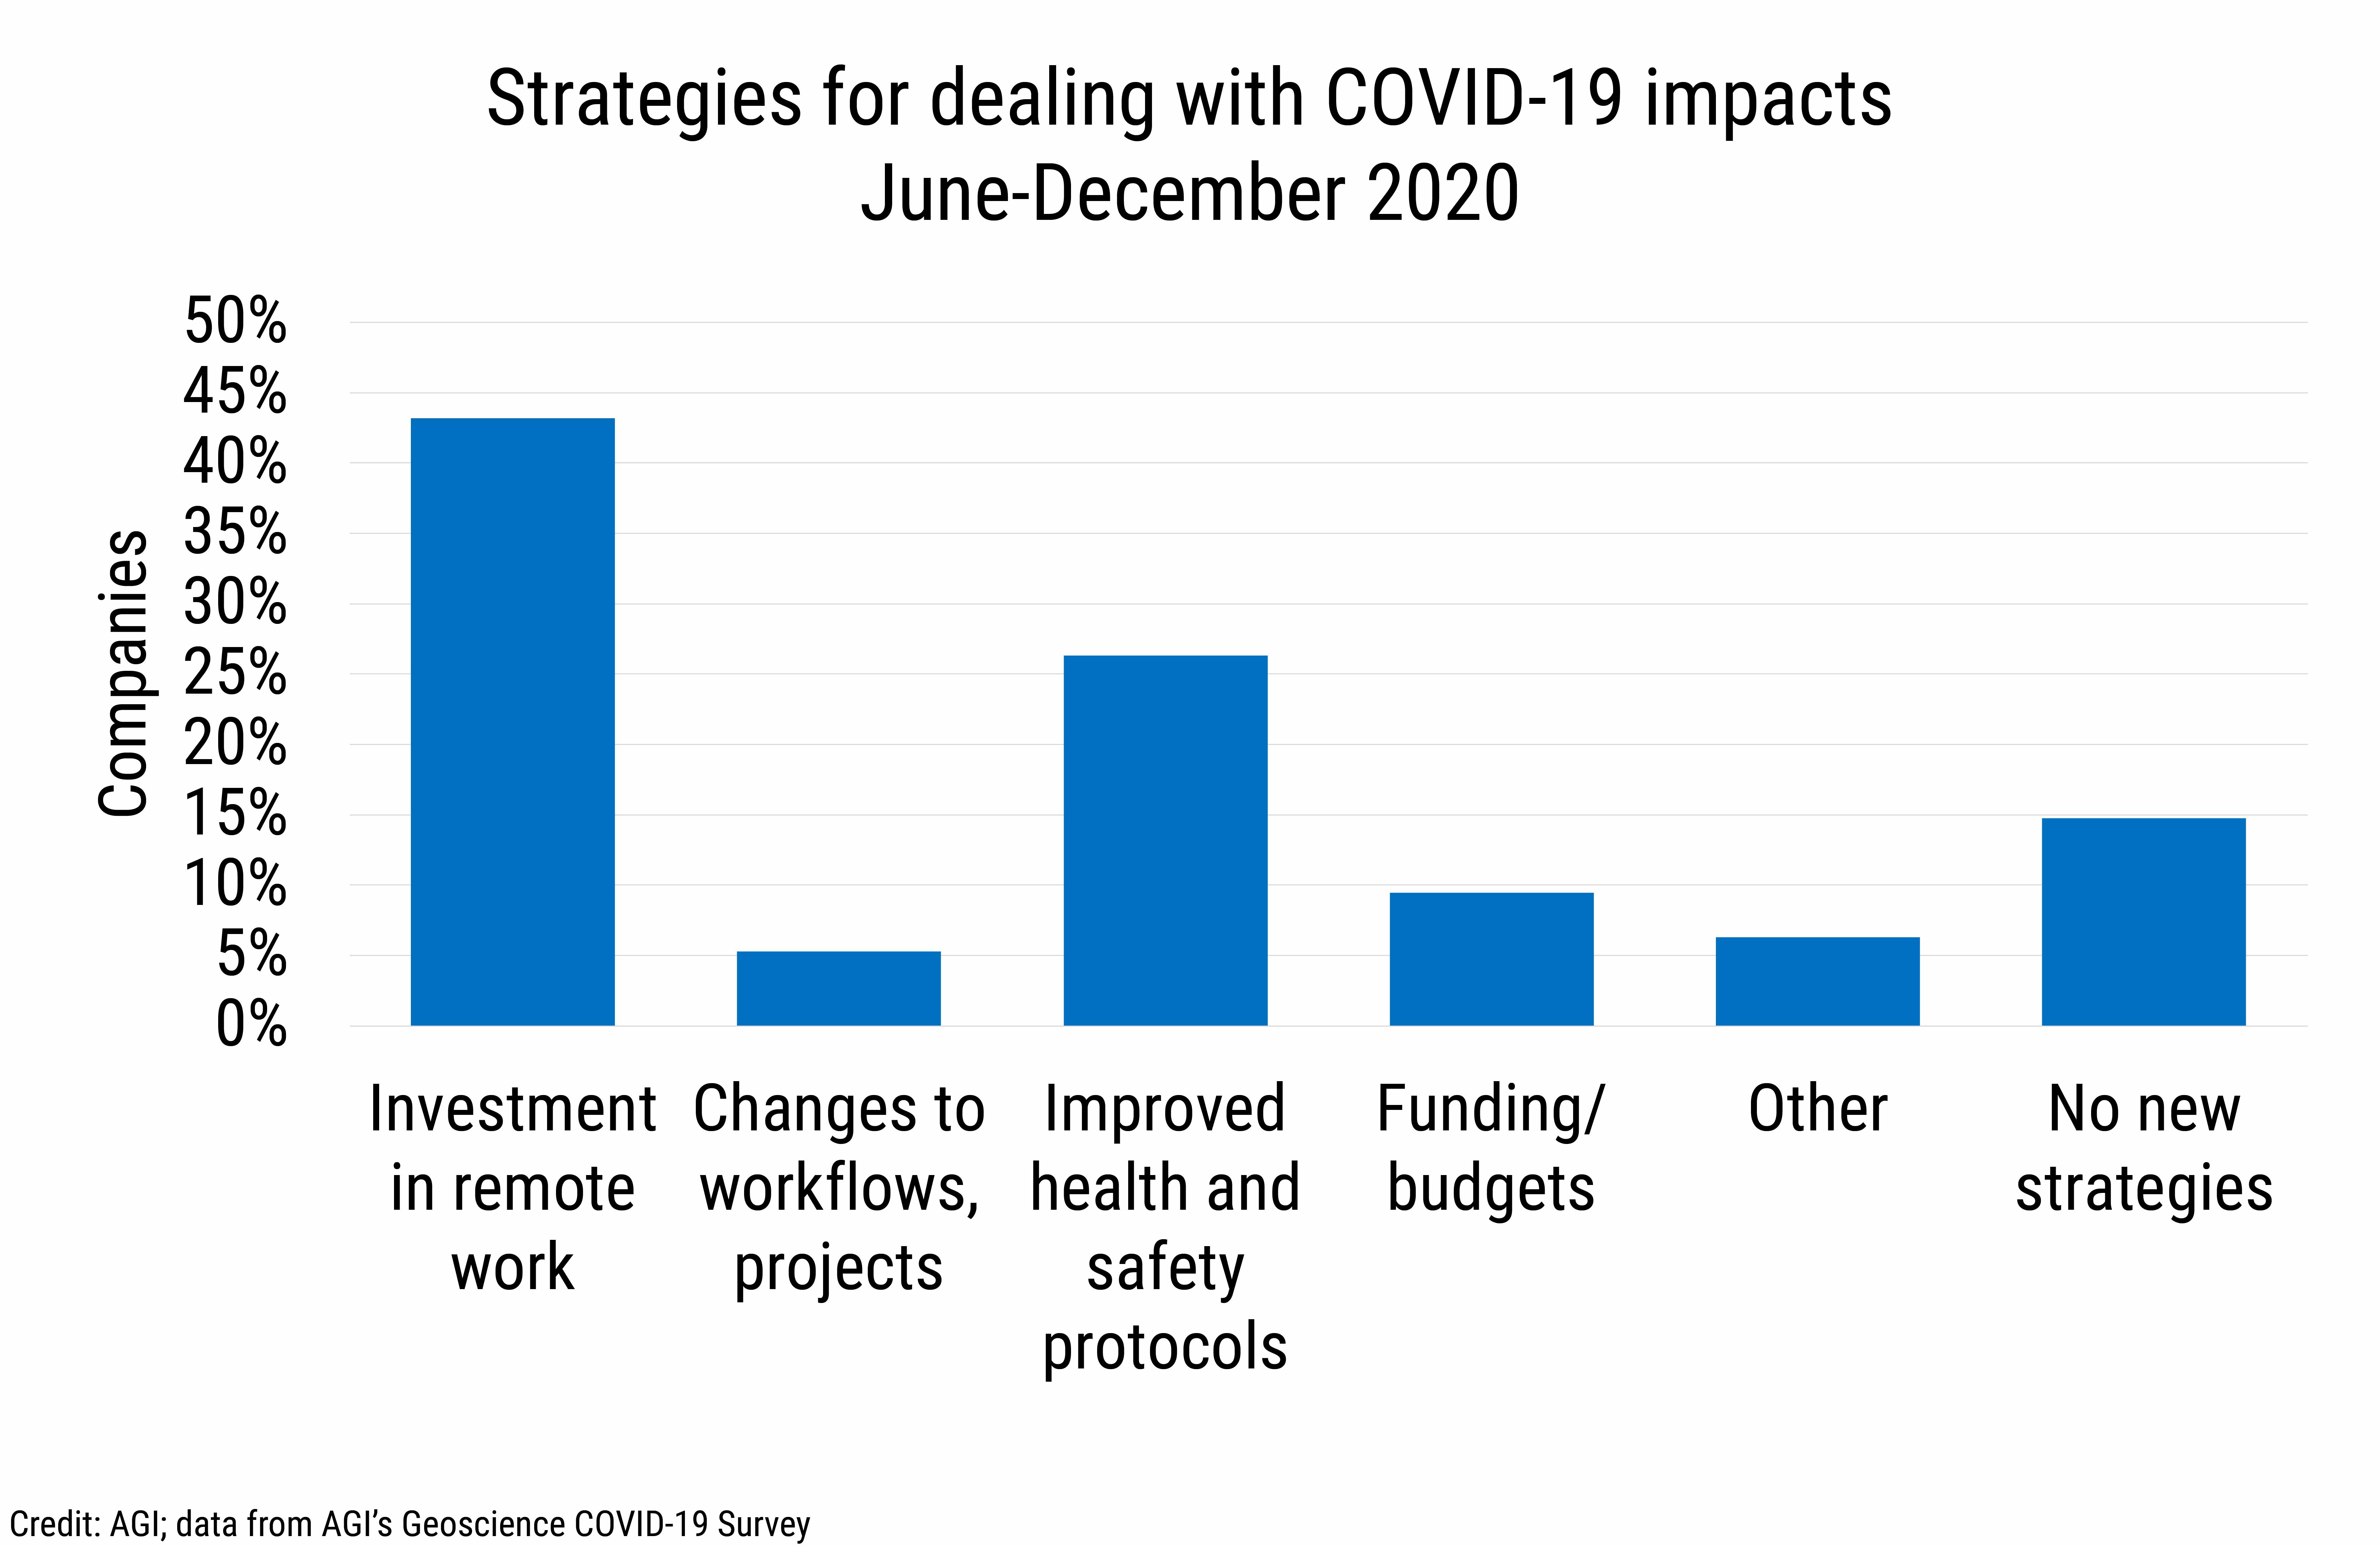 DB_2021-004_chart07: Strategies for dealing with COVID-19 impacts, June-December 2020 (Credit: AGI; data from AGI's Geoscience COVID-19 Survey)